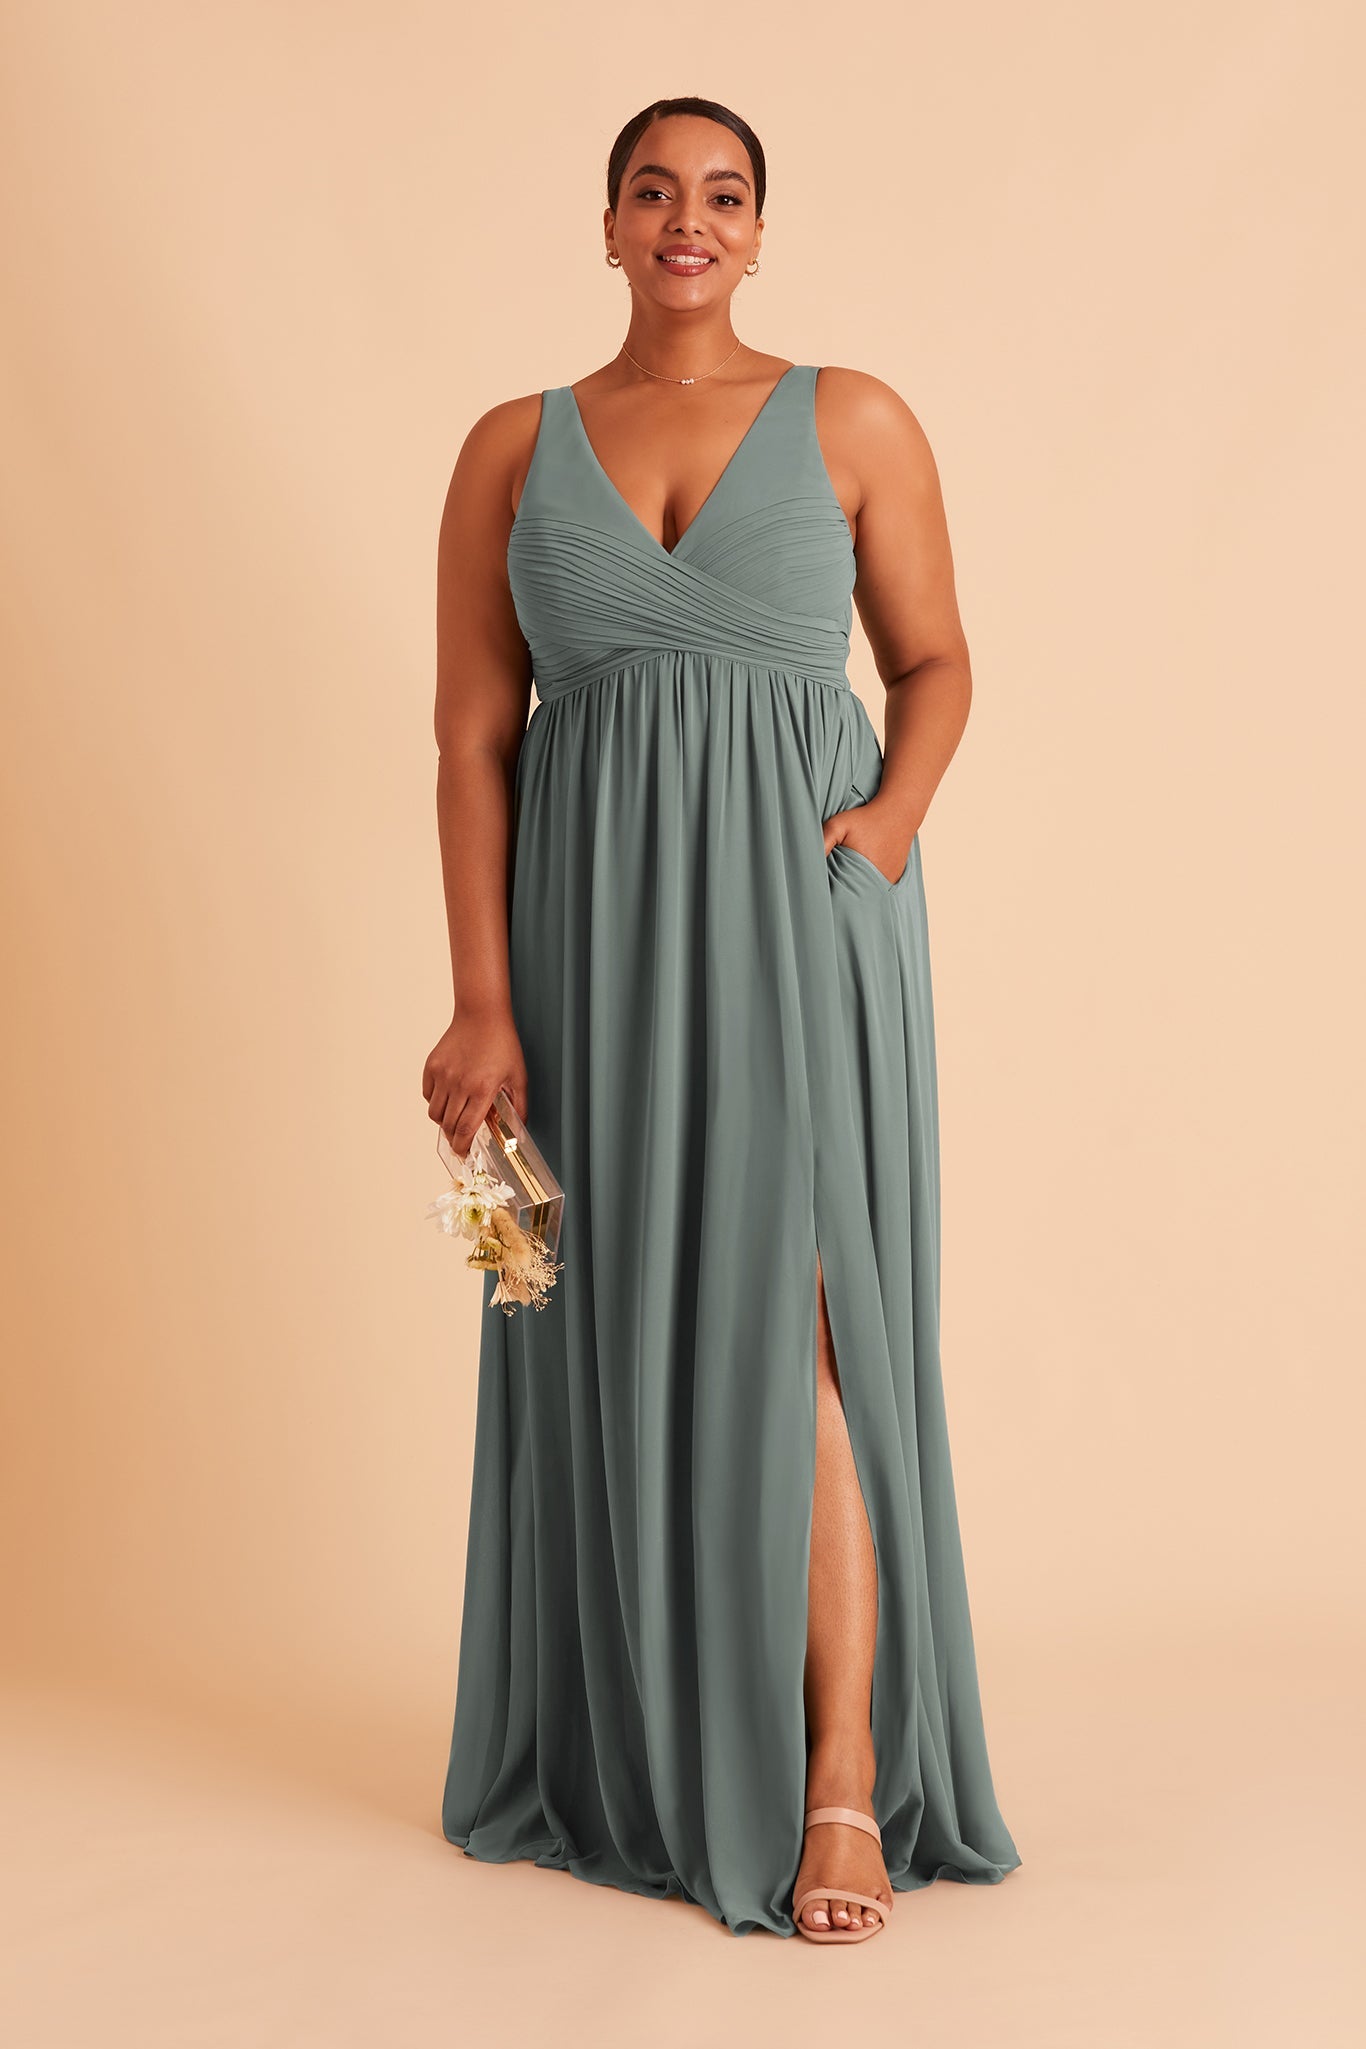 Laurie Empire plus size maternity bridesmaid dress with slit in sea glass chiffon by Birdy Grey, hand in pocket, front view